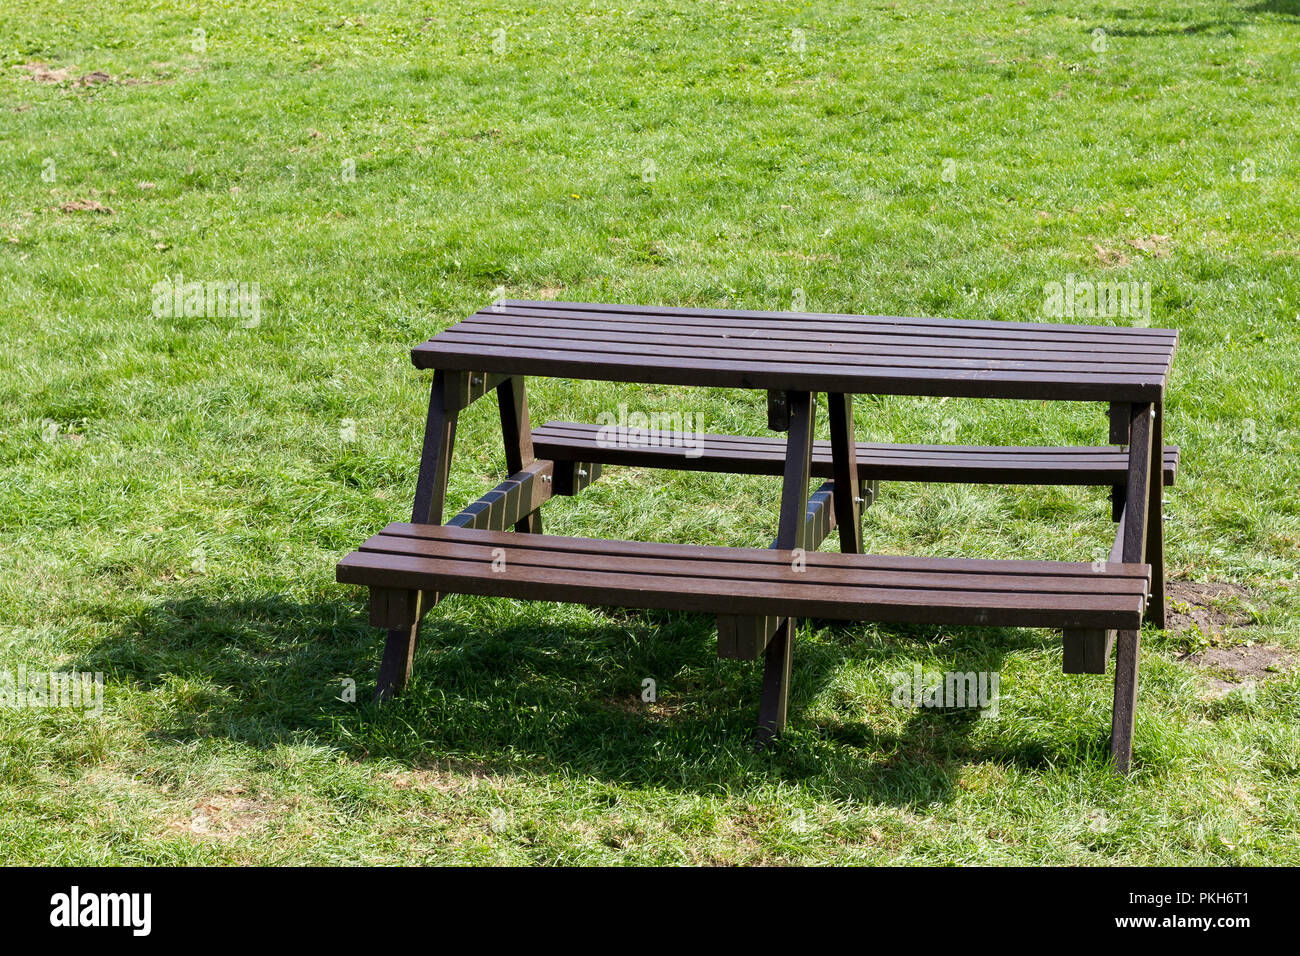 Empty wooden picnic bench, picnic table on grass, Dorset, England, UK Stock Photo